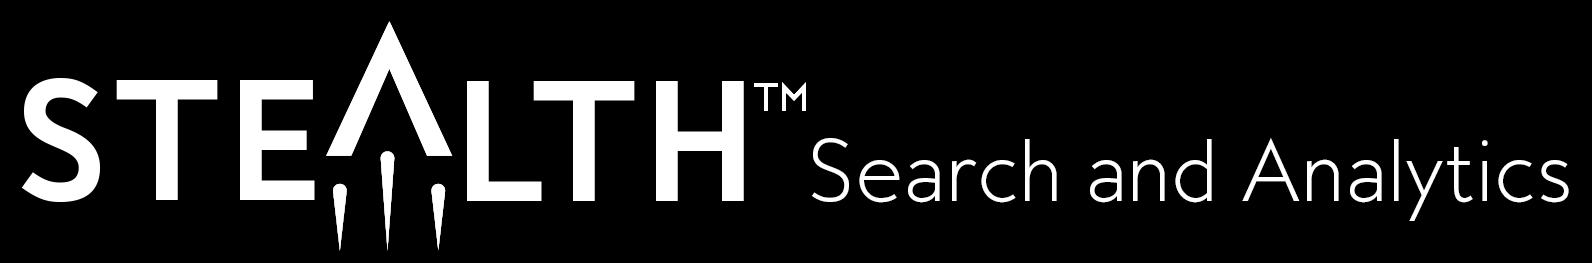 Stealth Search and Analytics logo